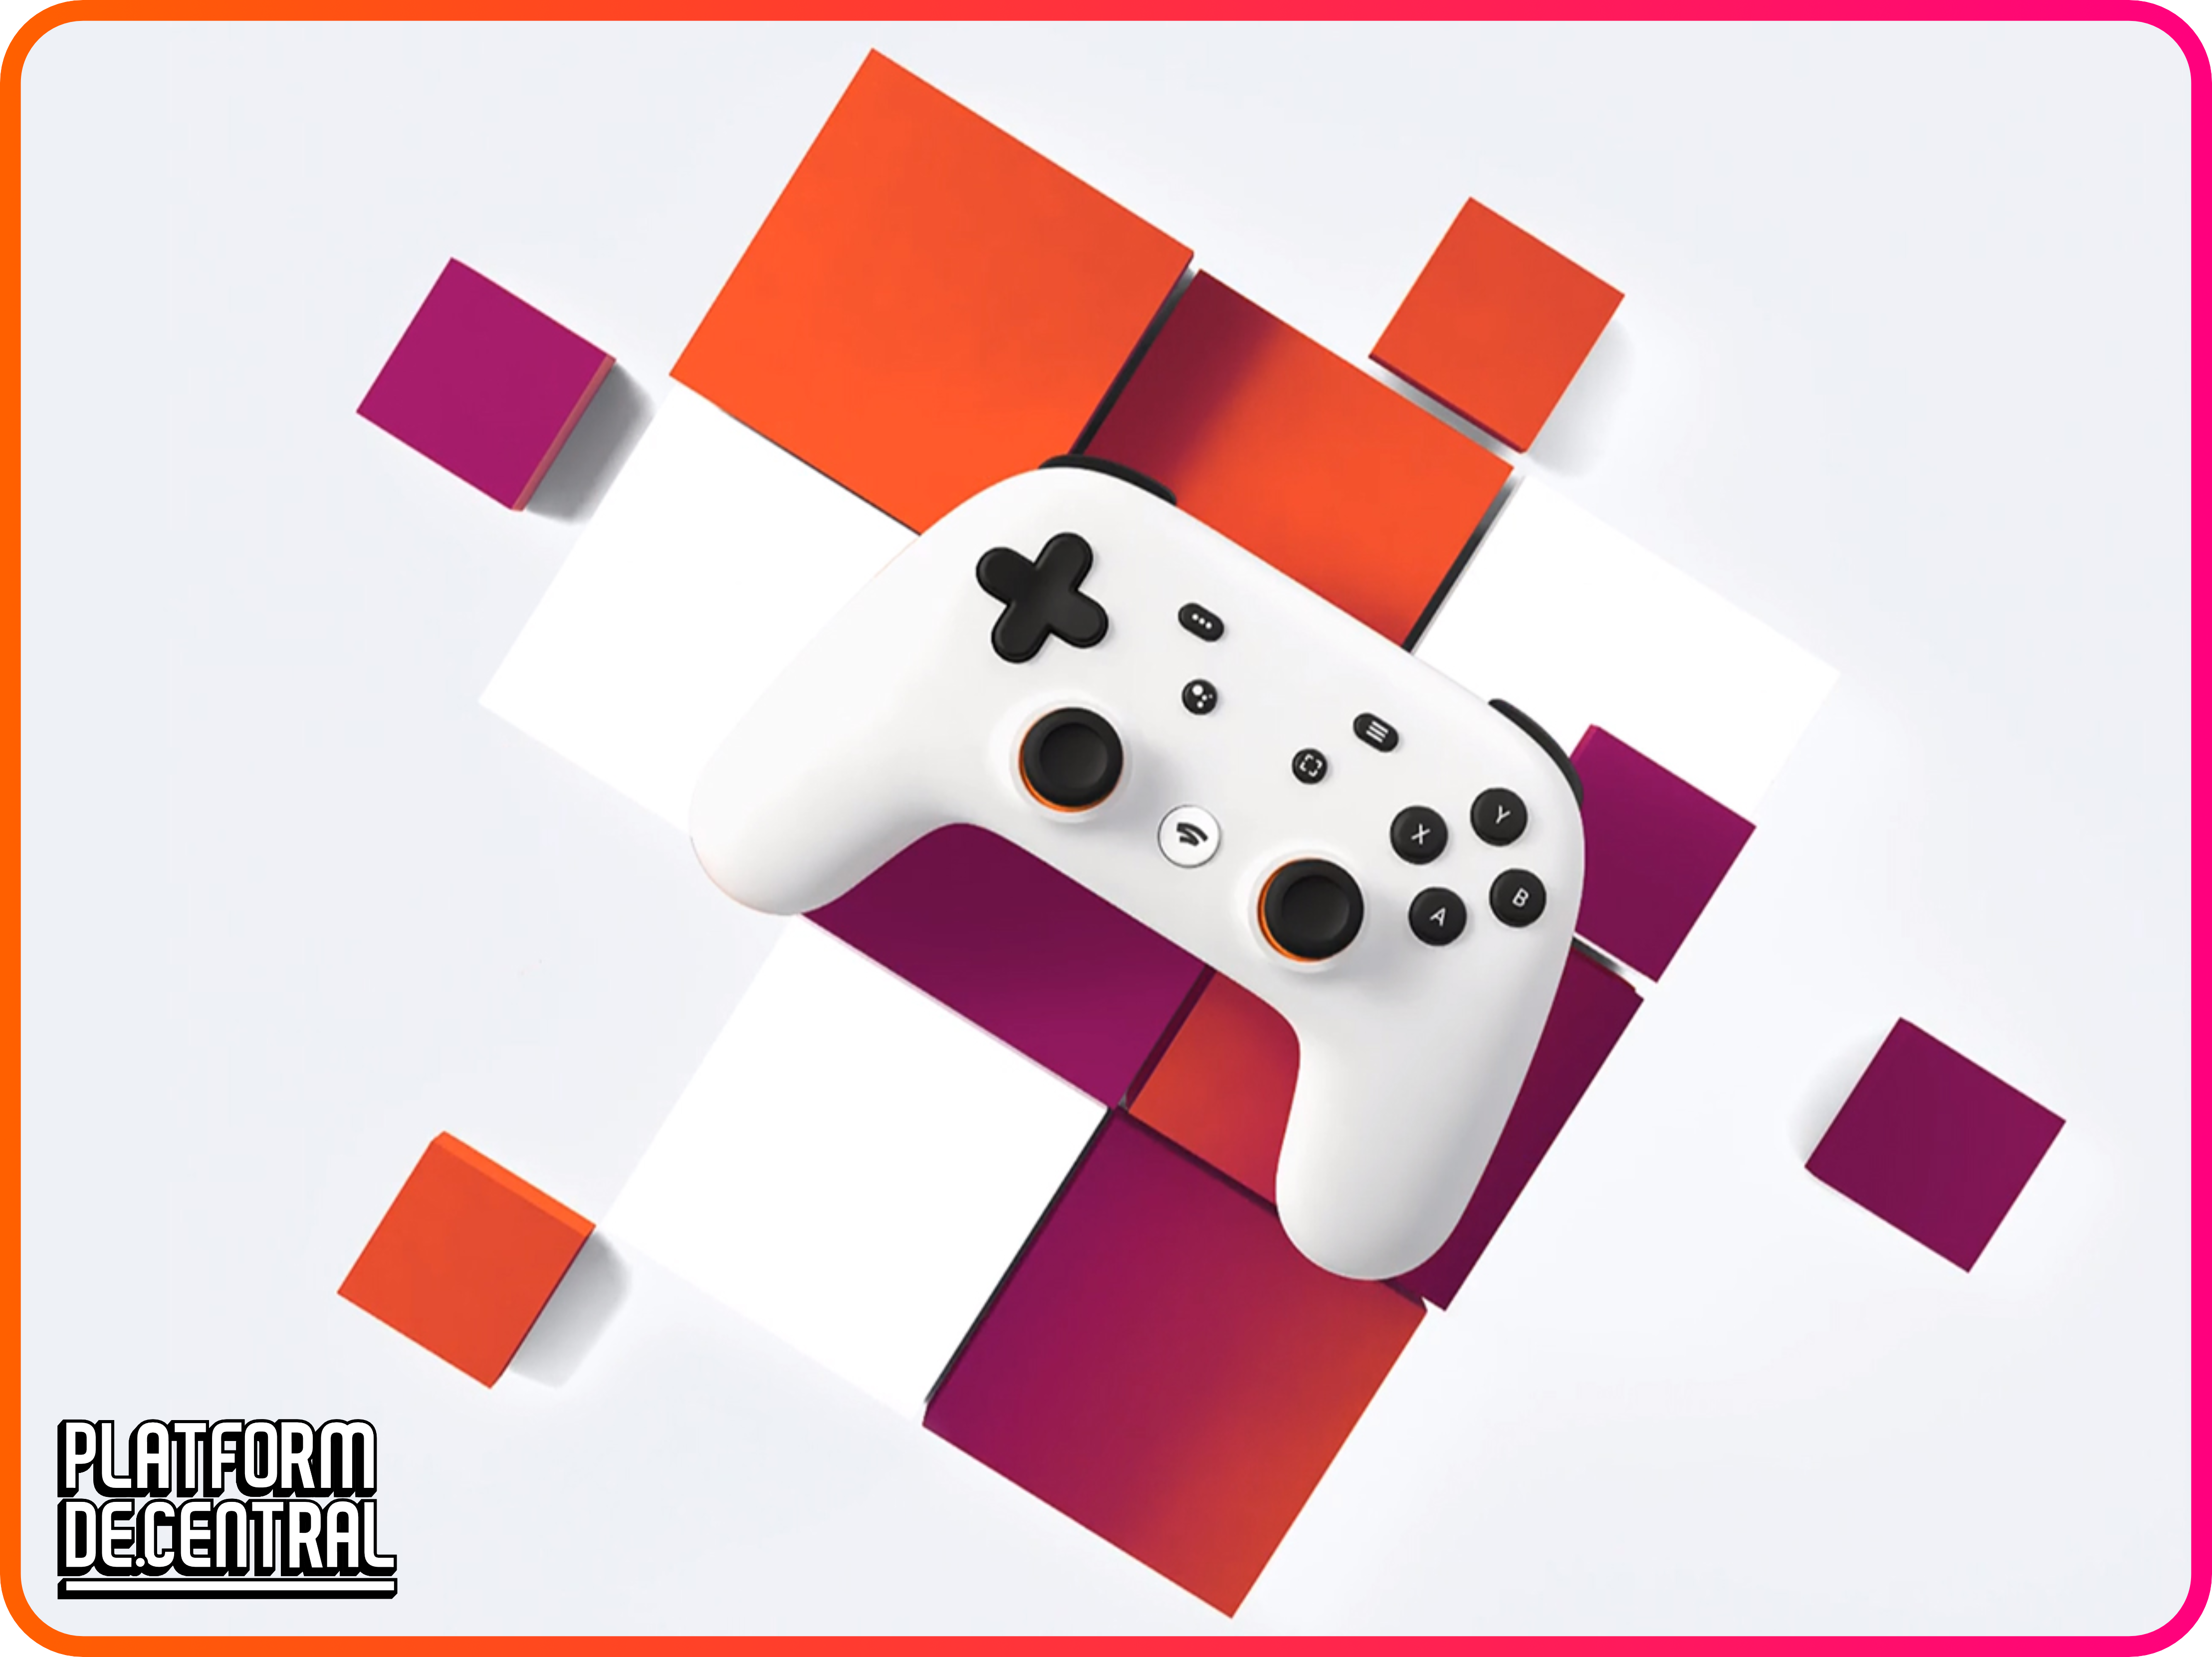 Google says 400 games are in the pipeline for Stadia